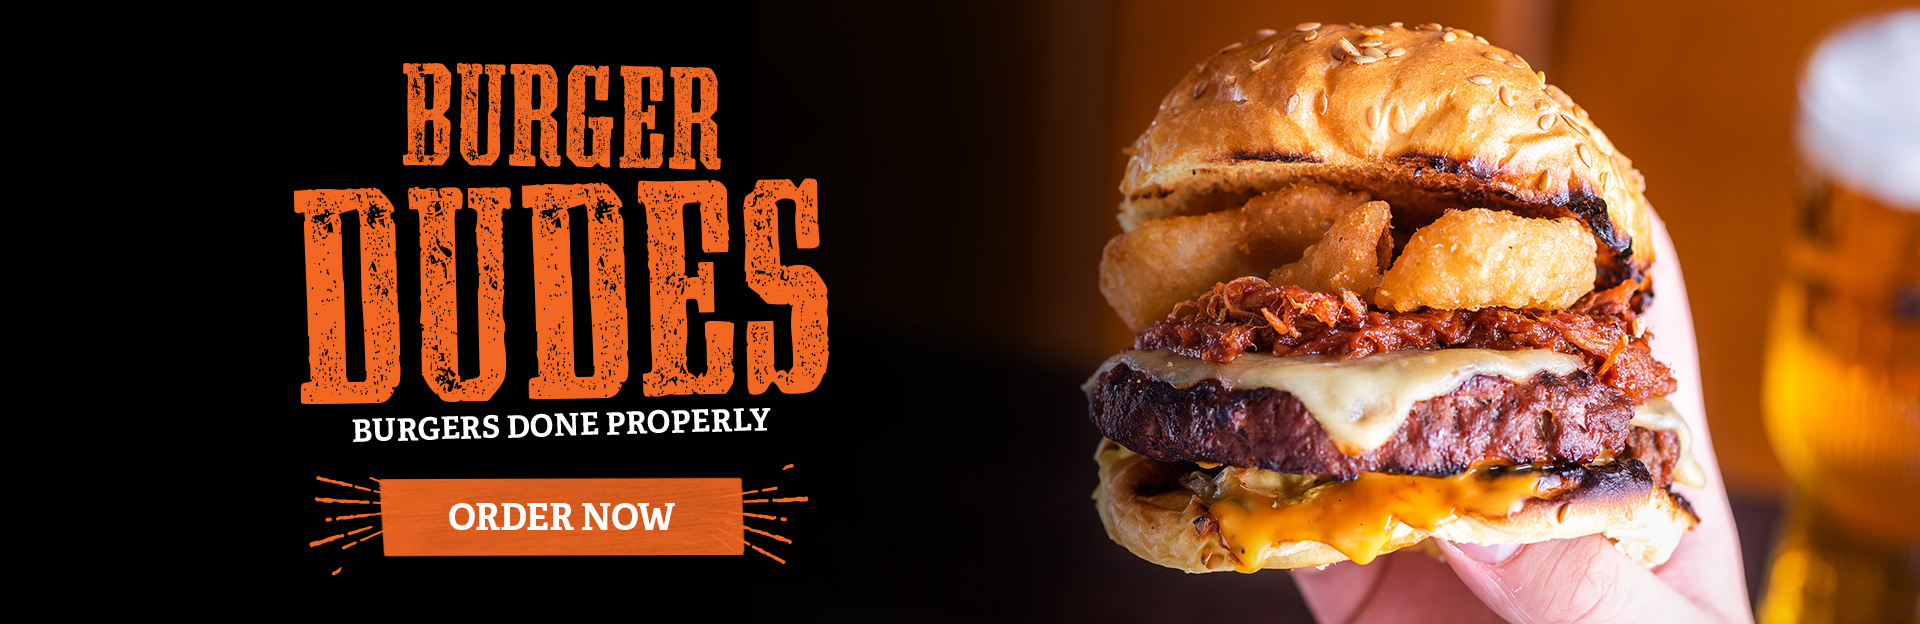 O’Neill’s Burger Dudes, Order delivery now